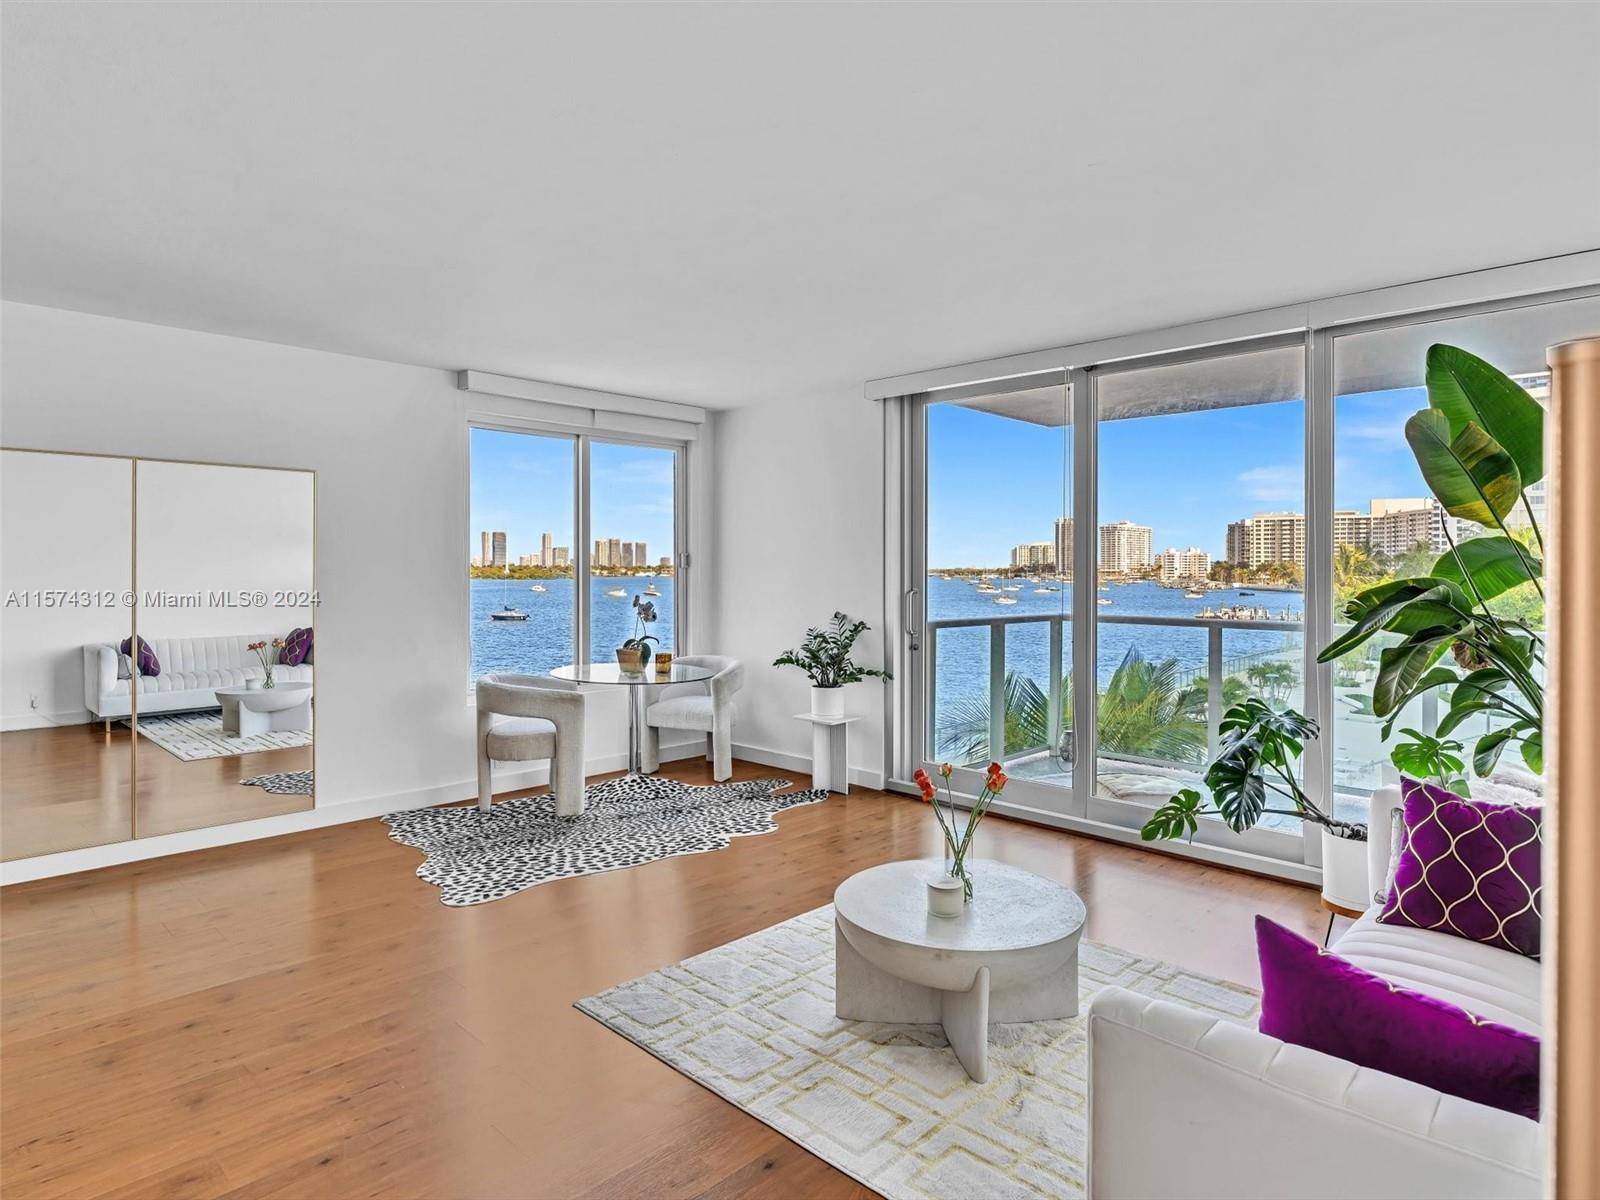 Enjoy Stunning Direct Bay Views the sunset from this immaculate corner unit at the luxurious Mirador 1000.